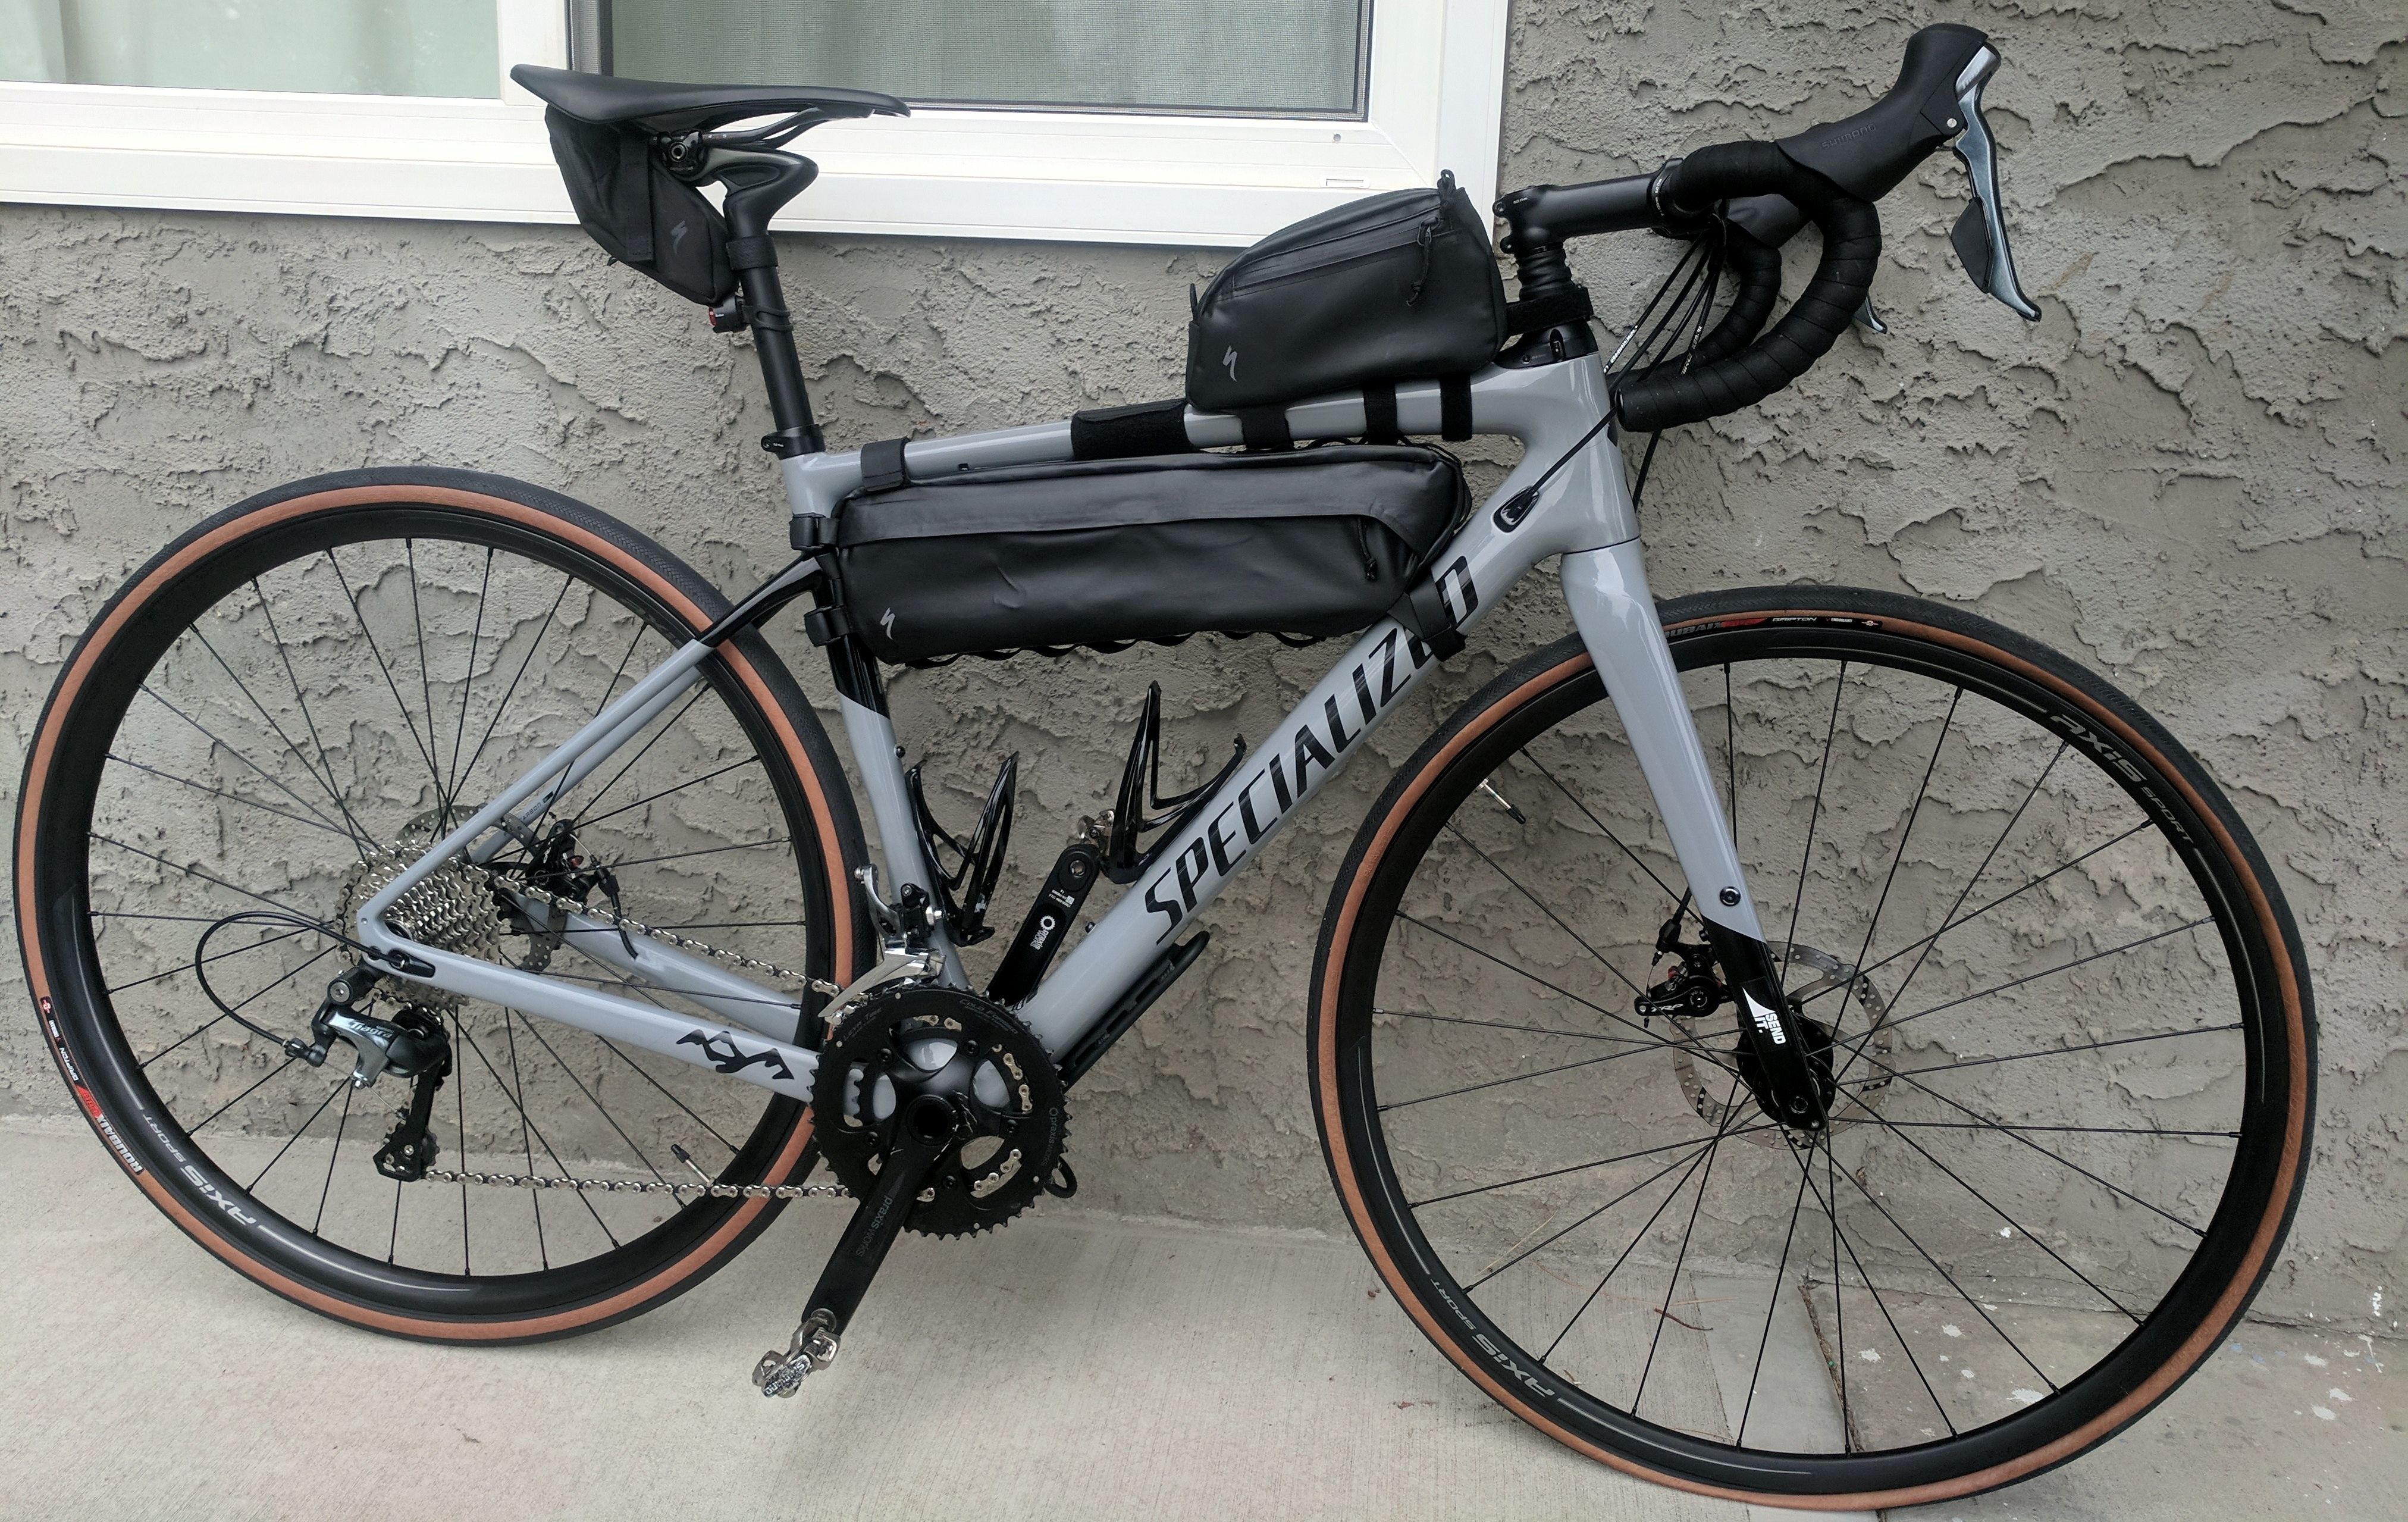 specialized top tube pack